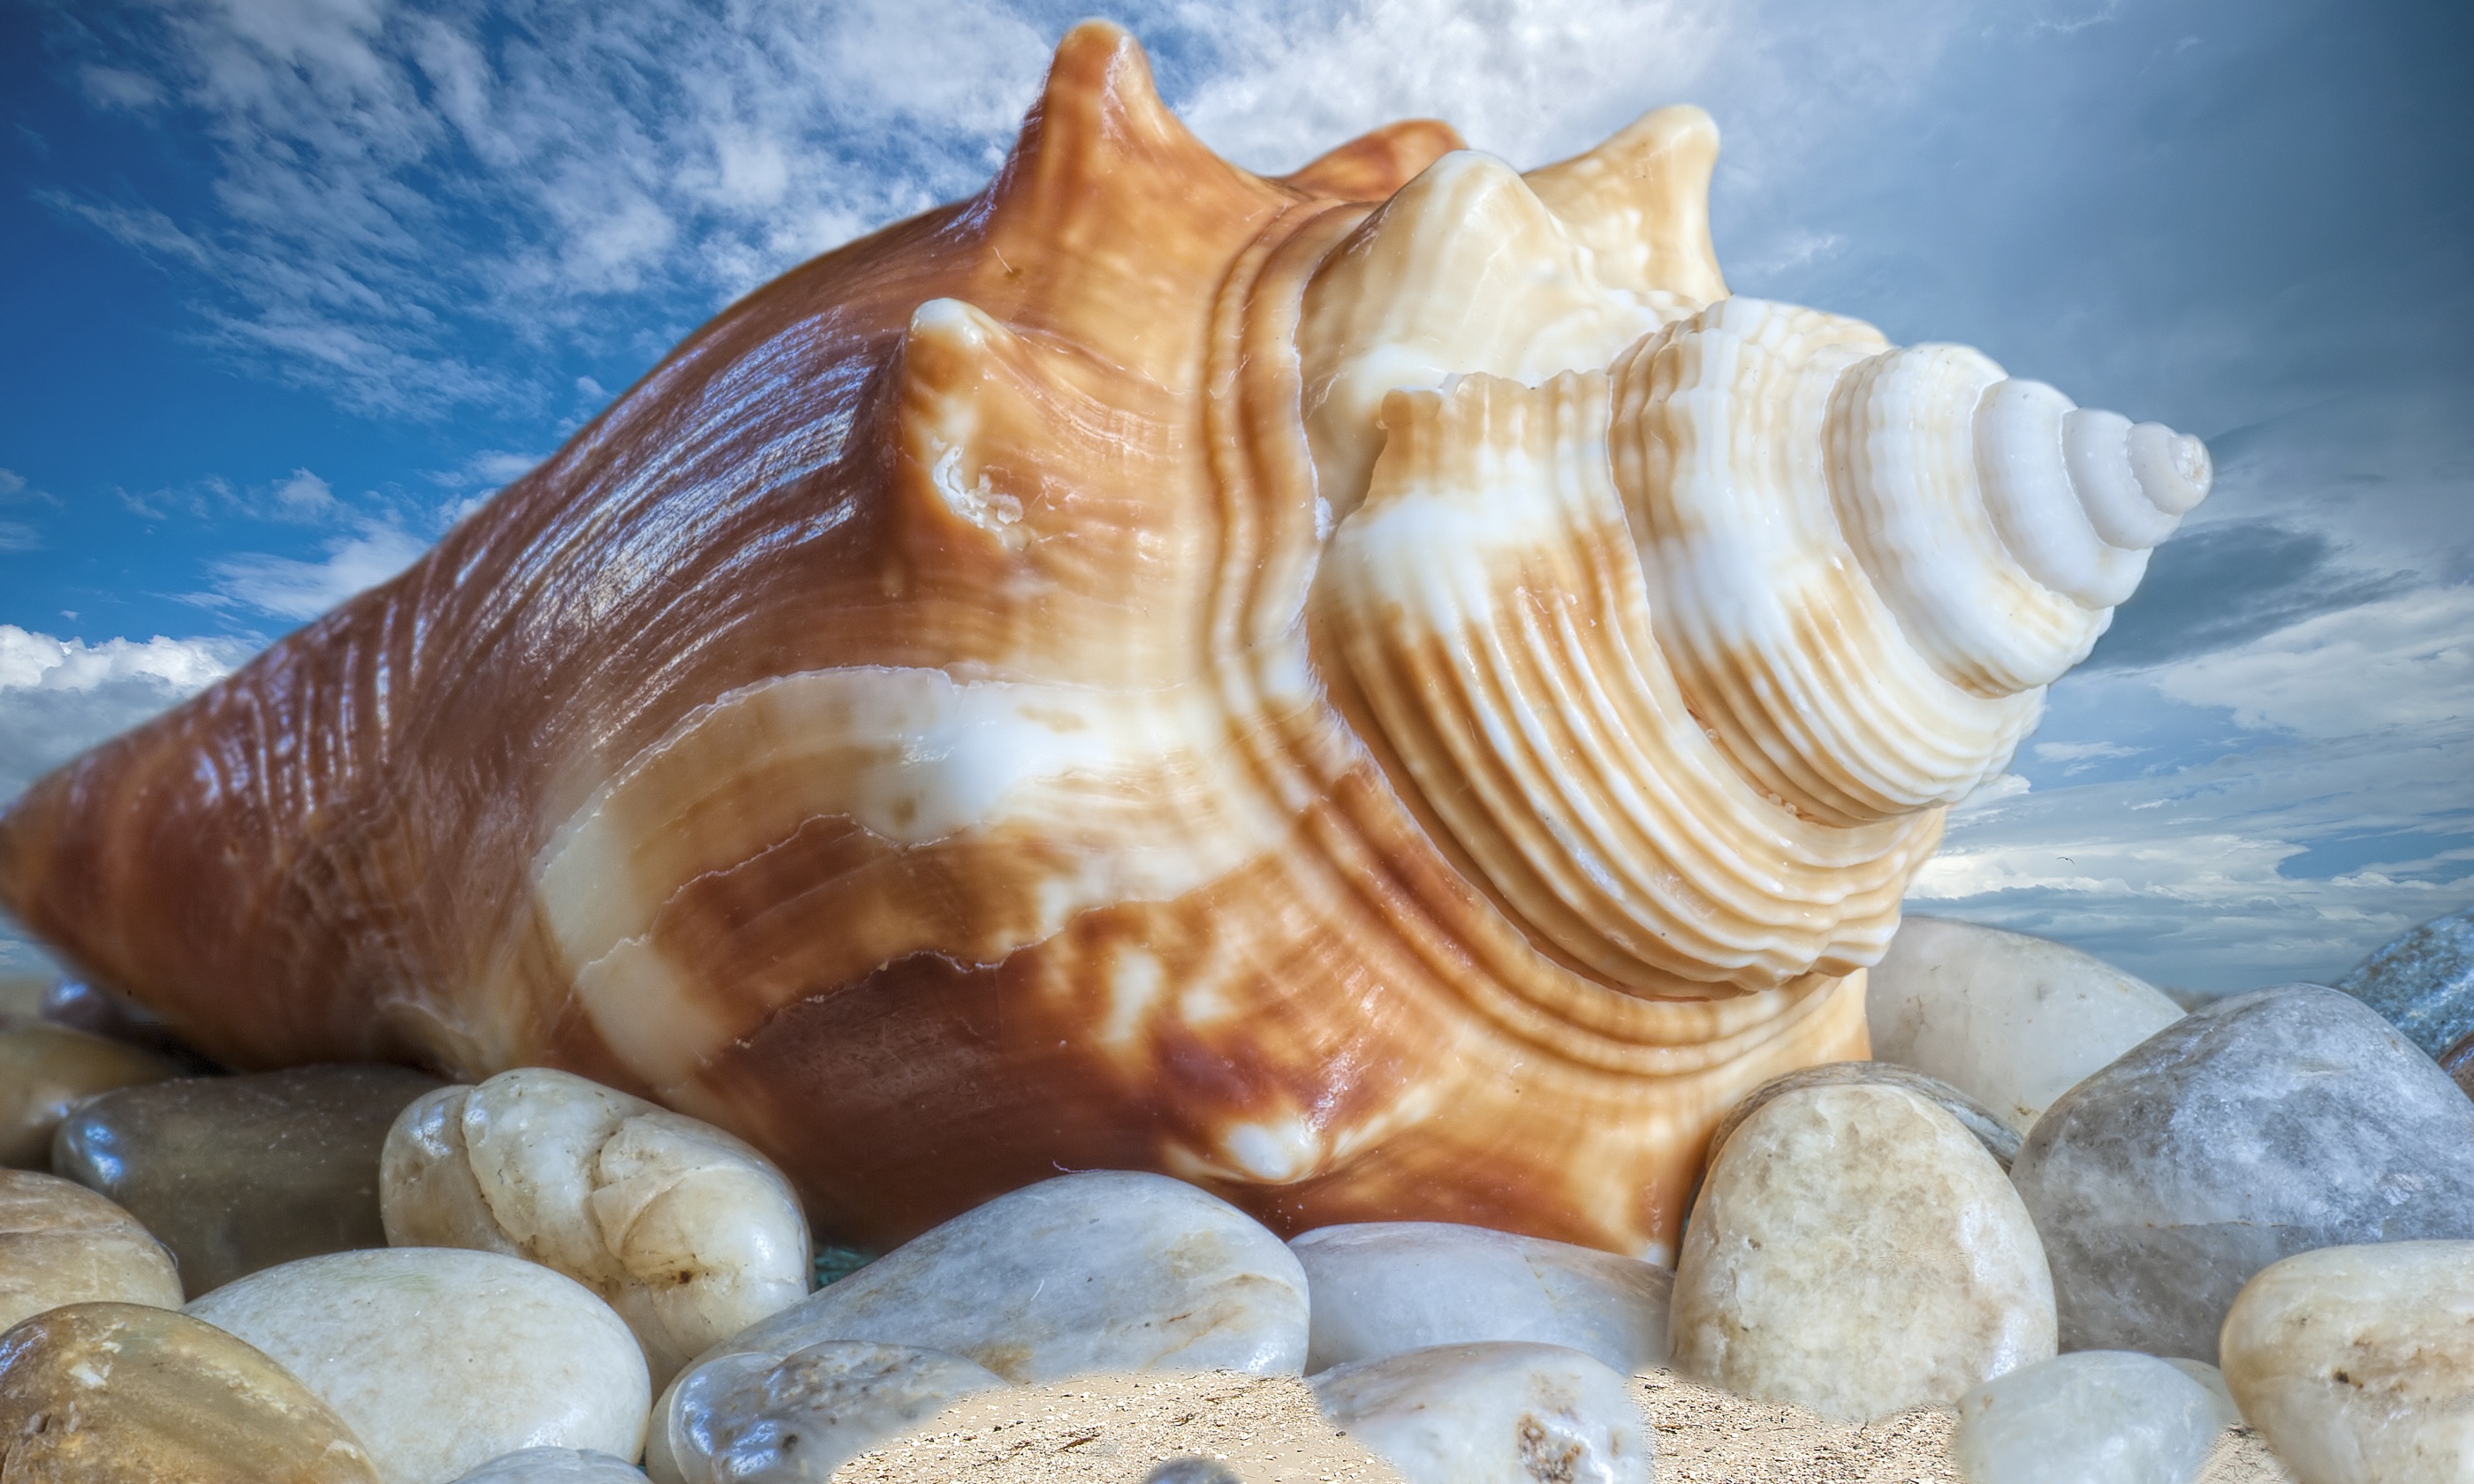 Florida fighting conch (Shutterstock: see main credit below)